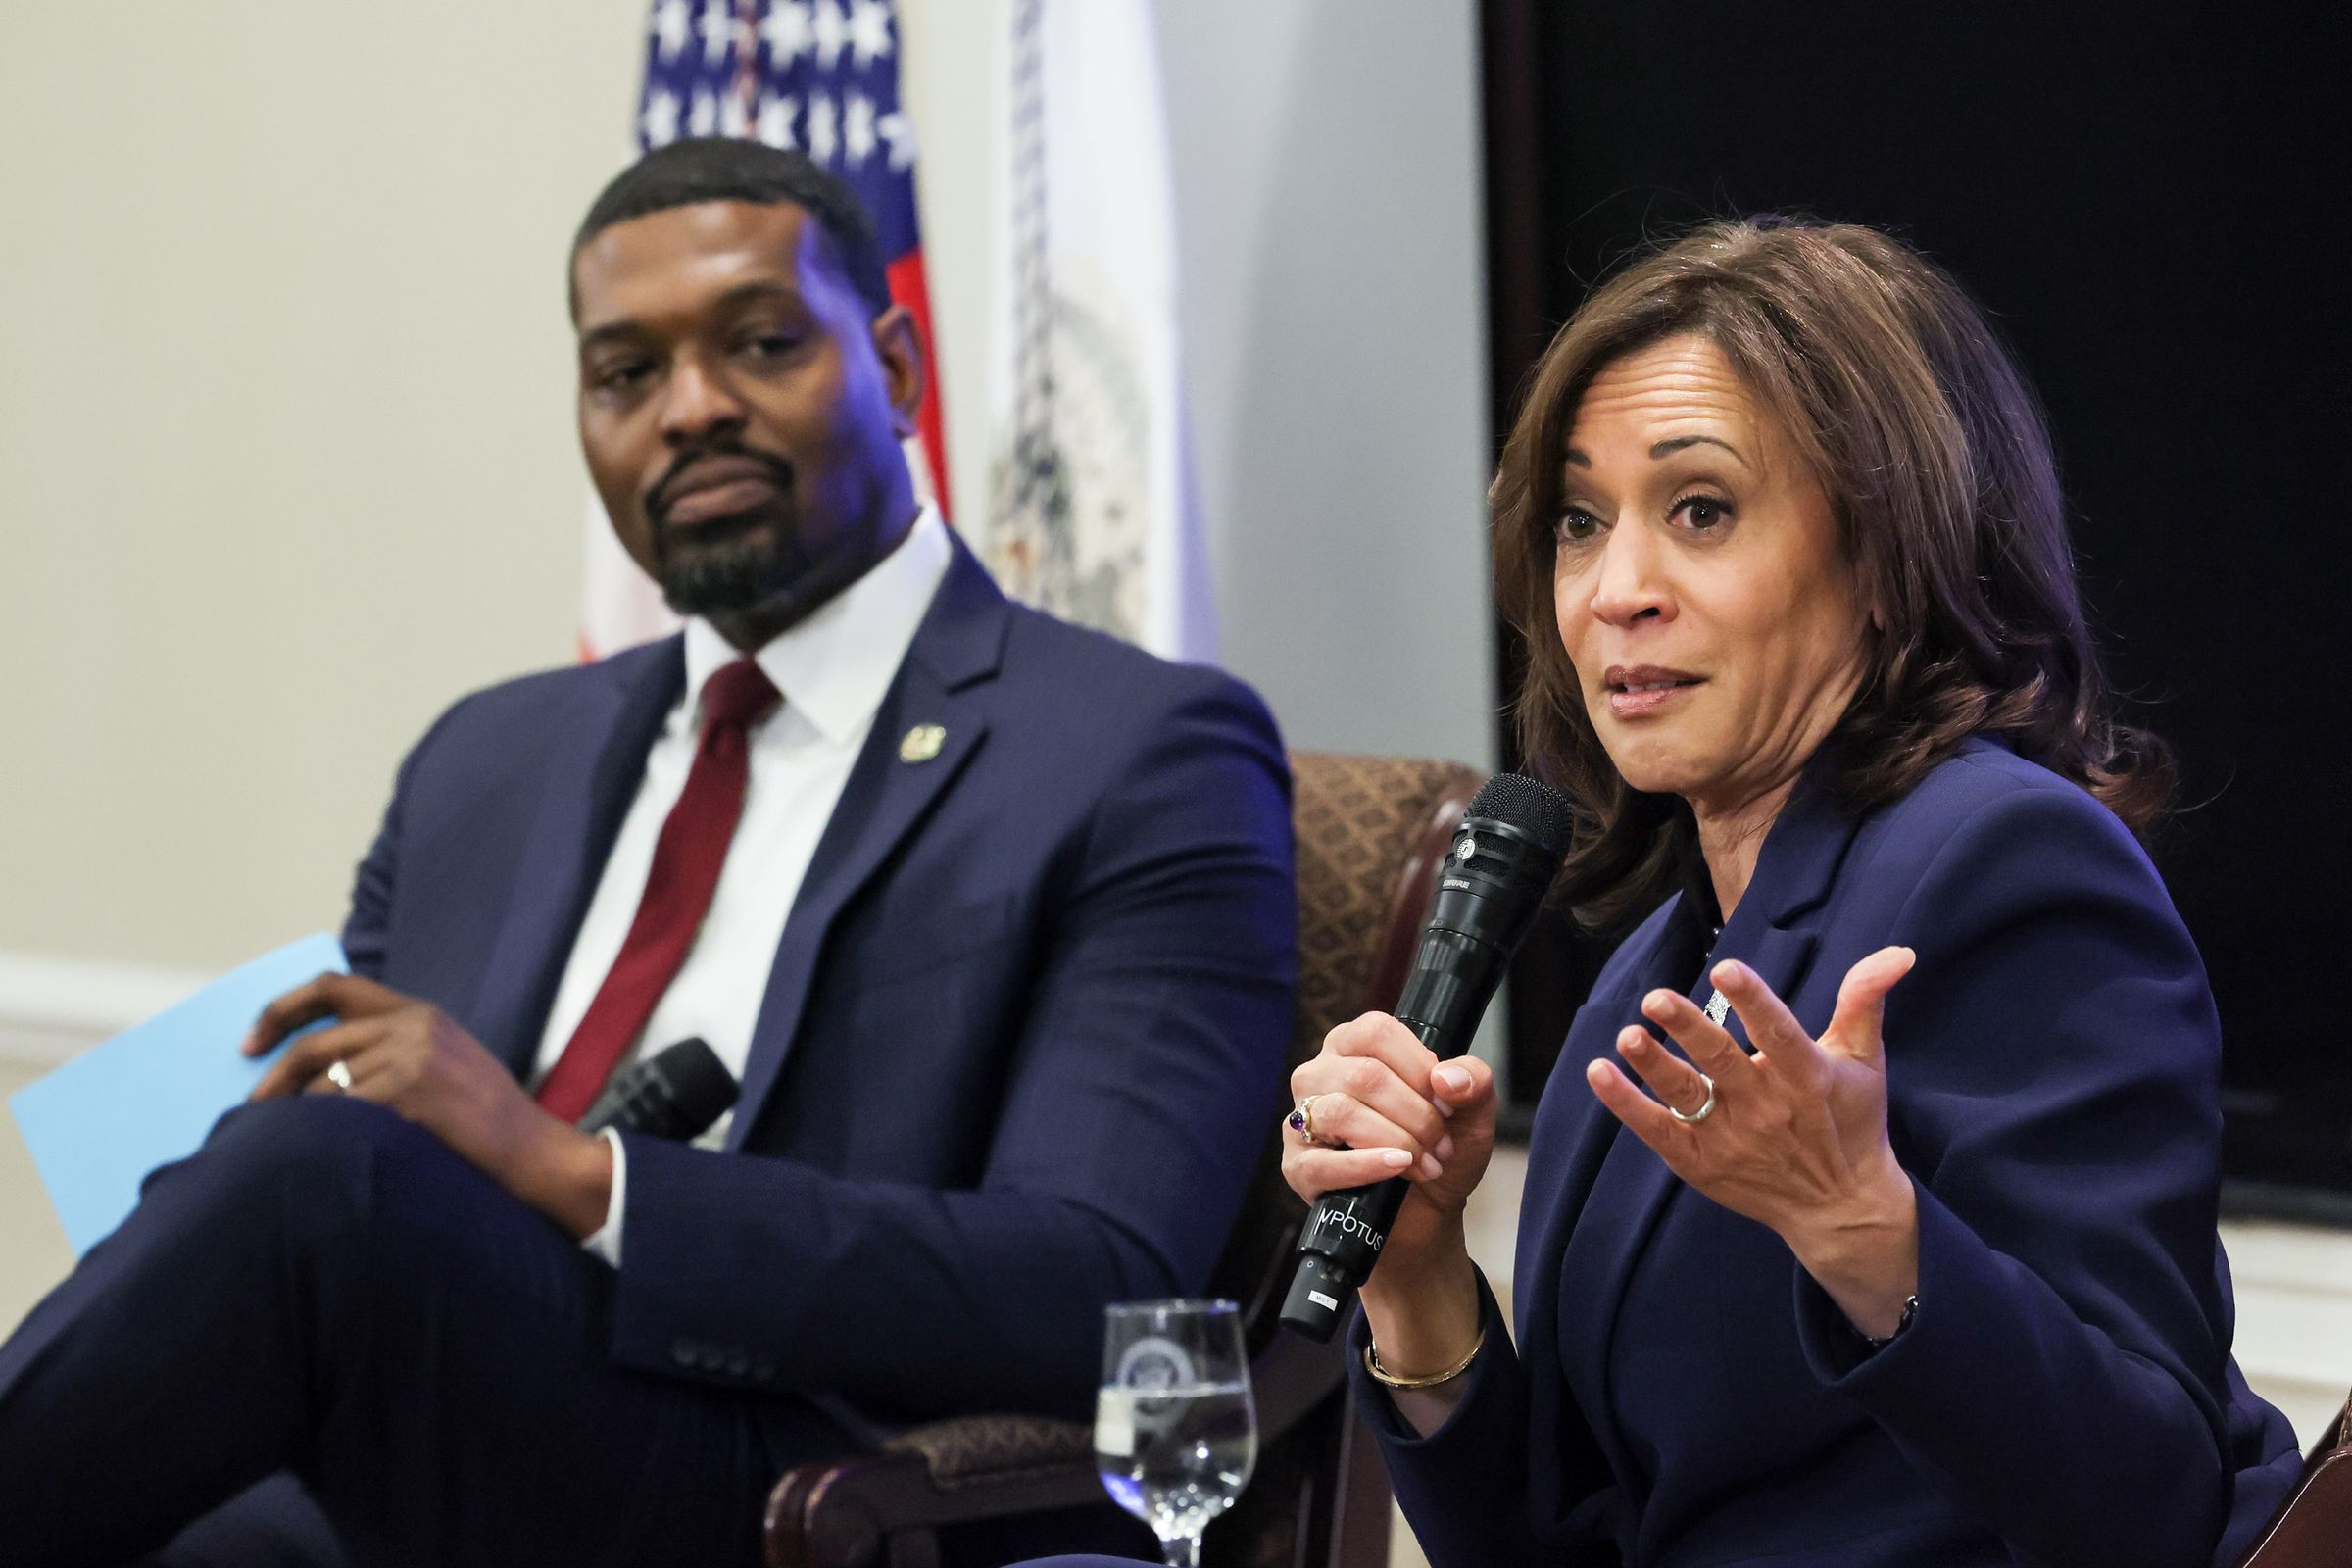 Kamala Harris speaks into a microphone, with Michael Regan sitting next to her.